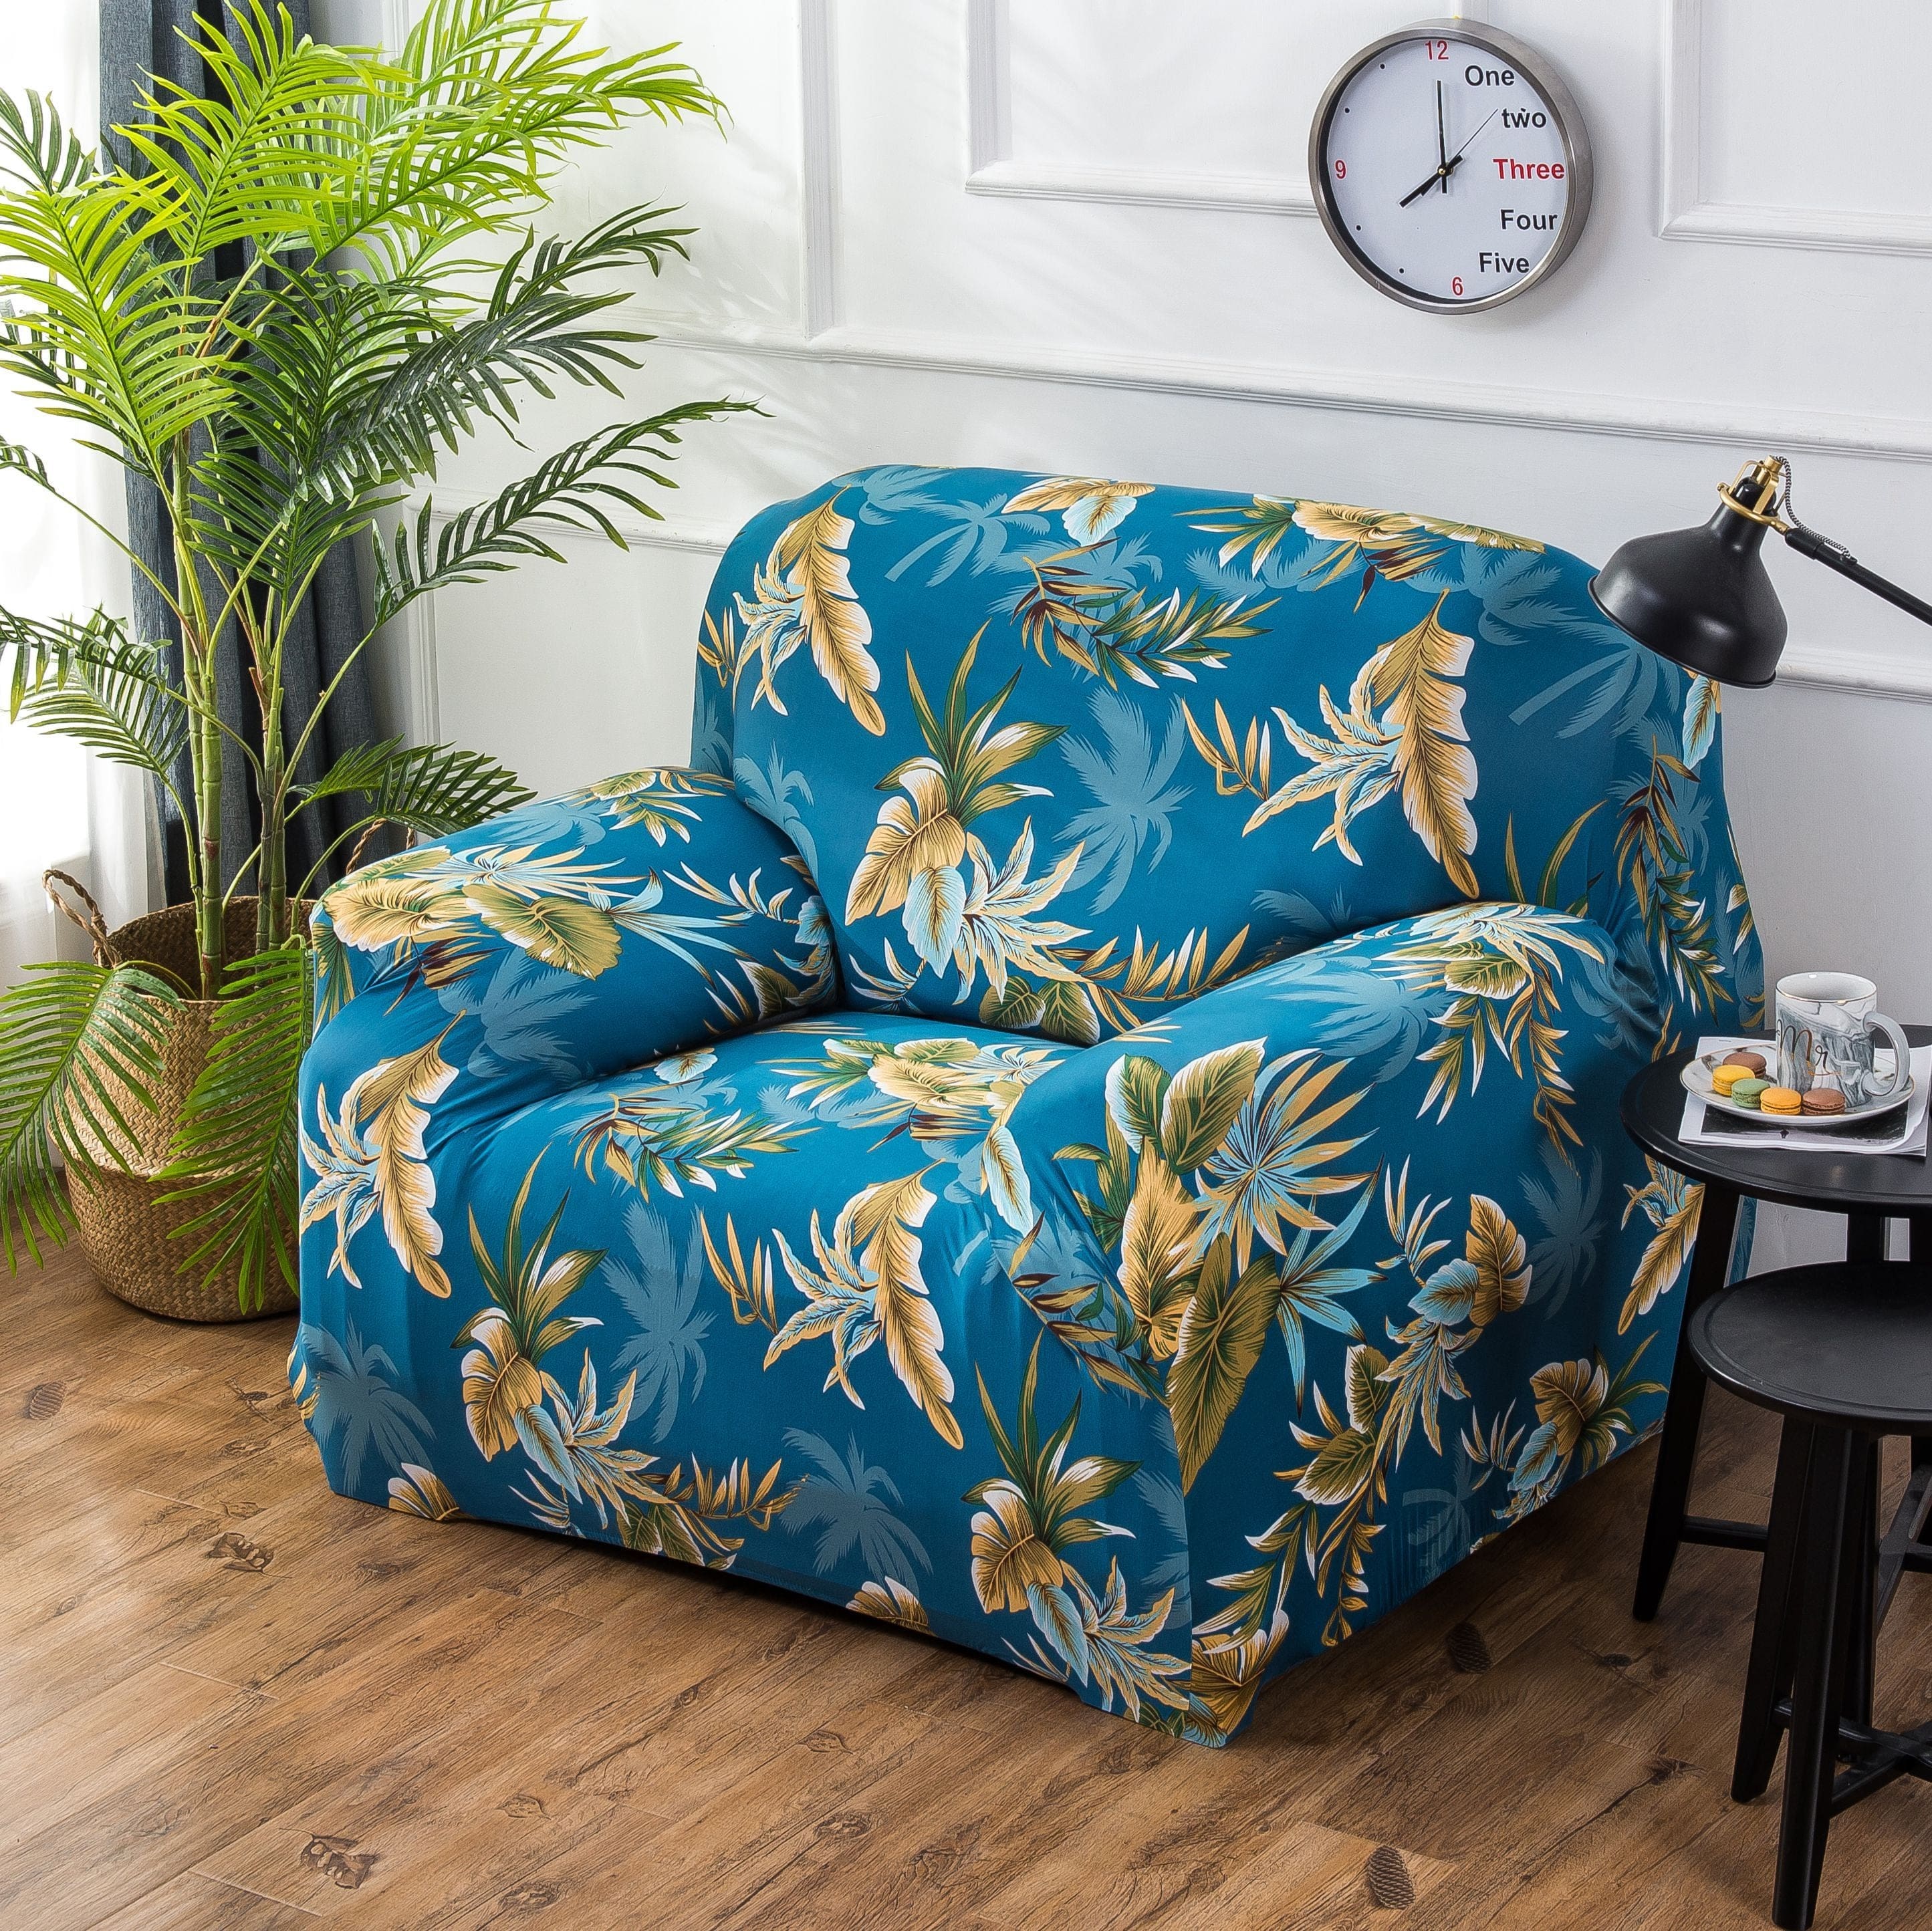 Green leaves - Extendable Armchair and Sofa Covers - The Sofa Cover House